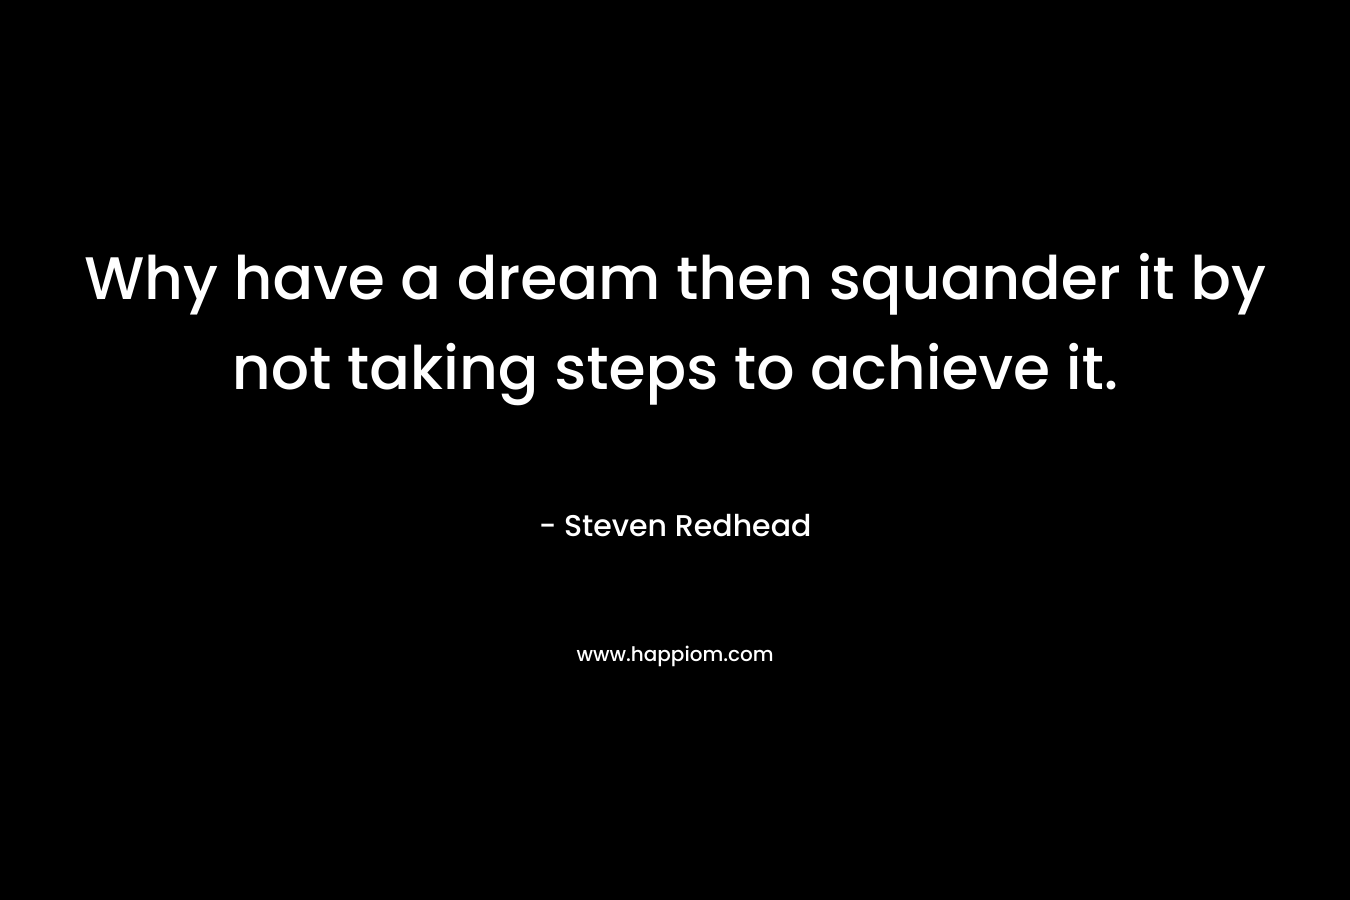 Why have a dream then squander it by not taking steps to achieve it.